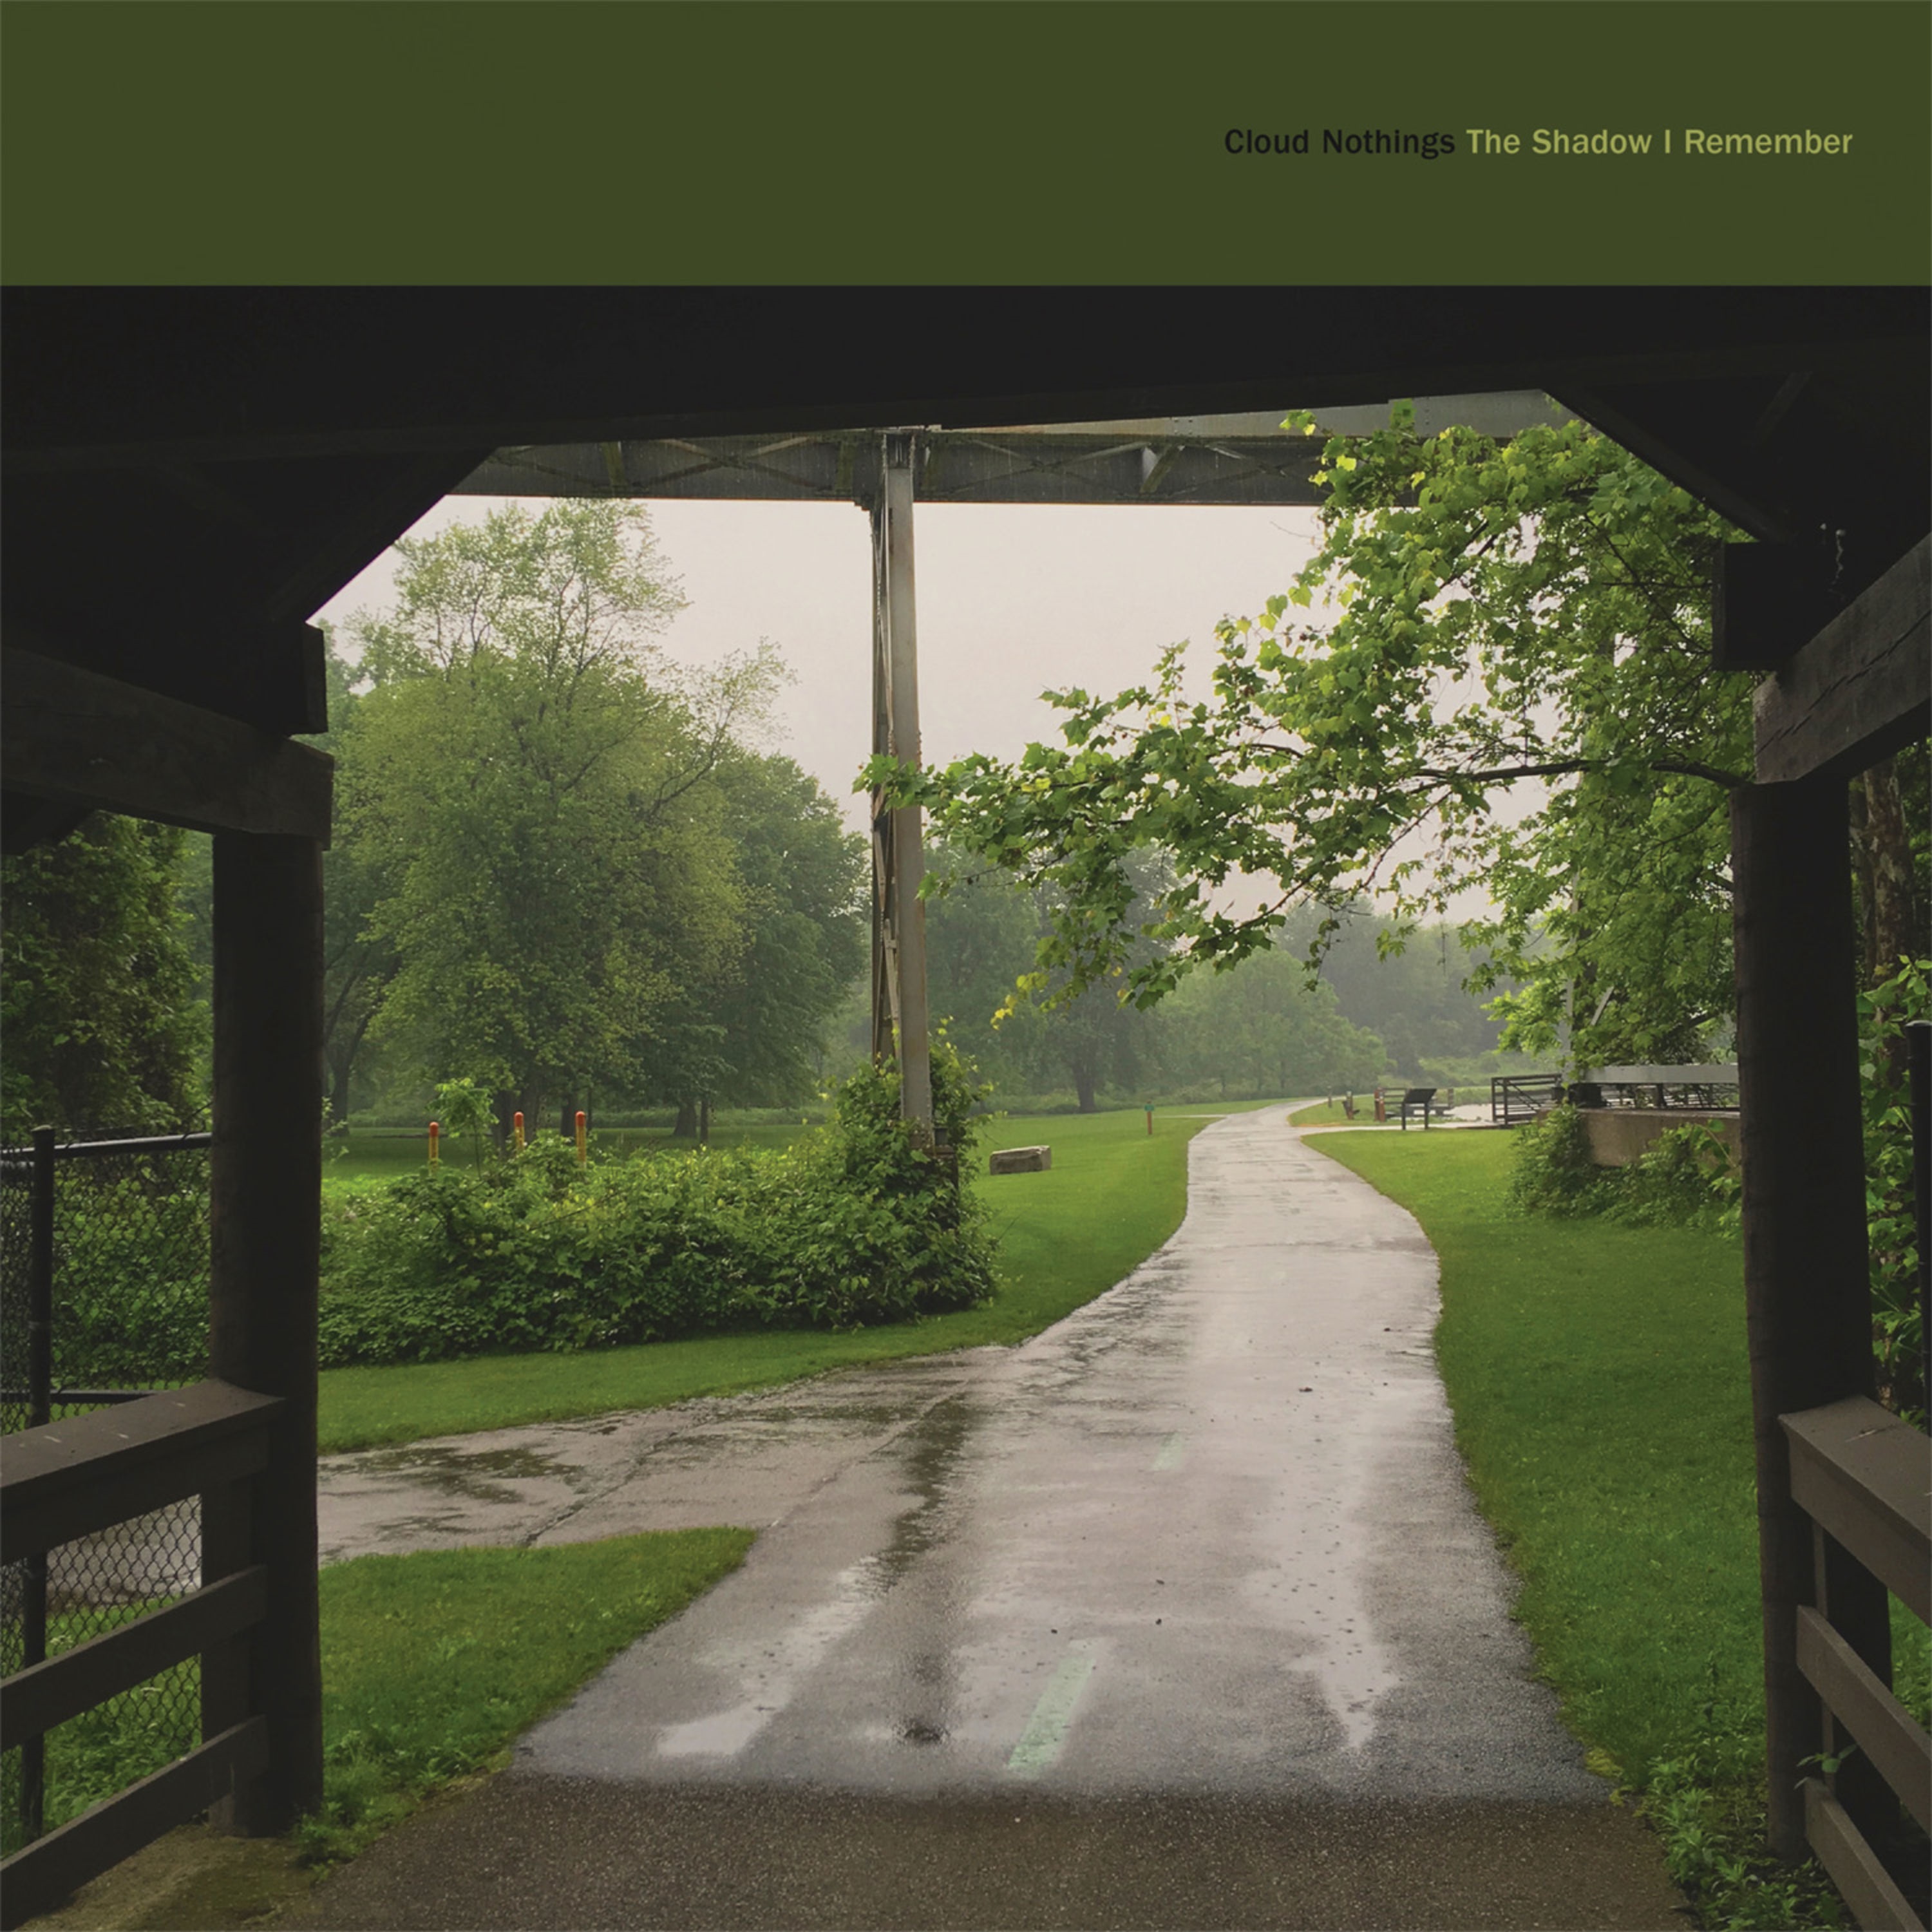 Cloud Nothings – The Shadow I Remember (2021) [FLAC 24bit/96kHz]